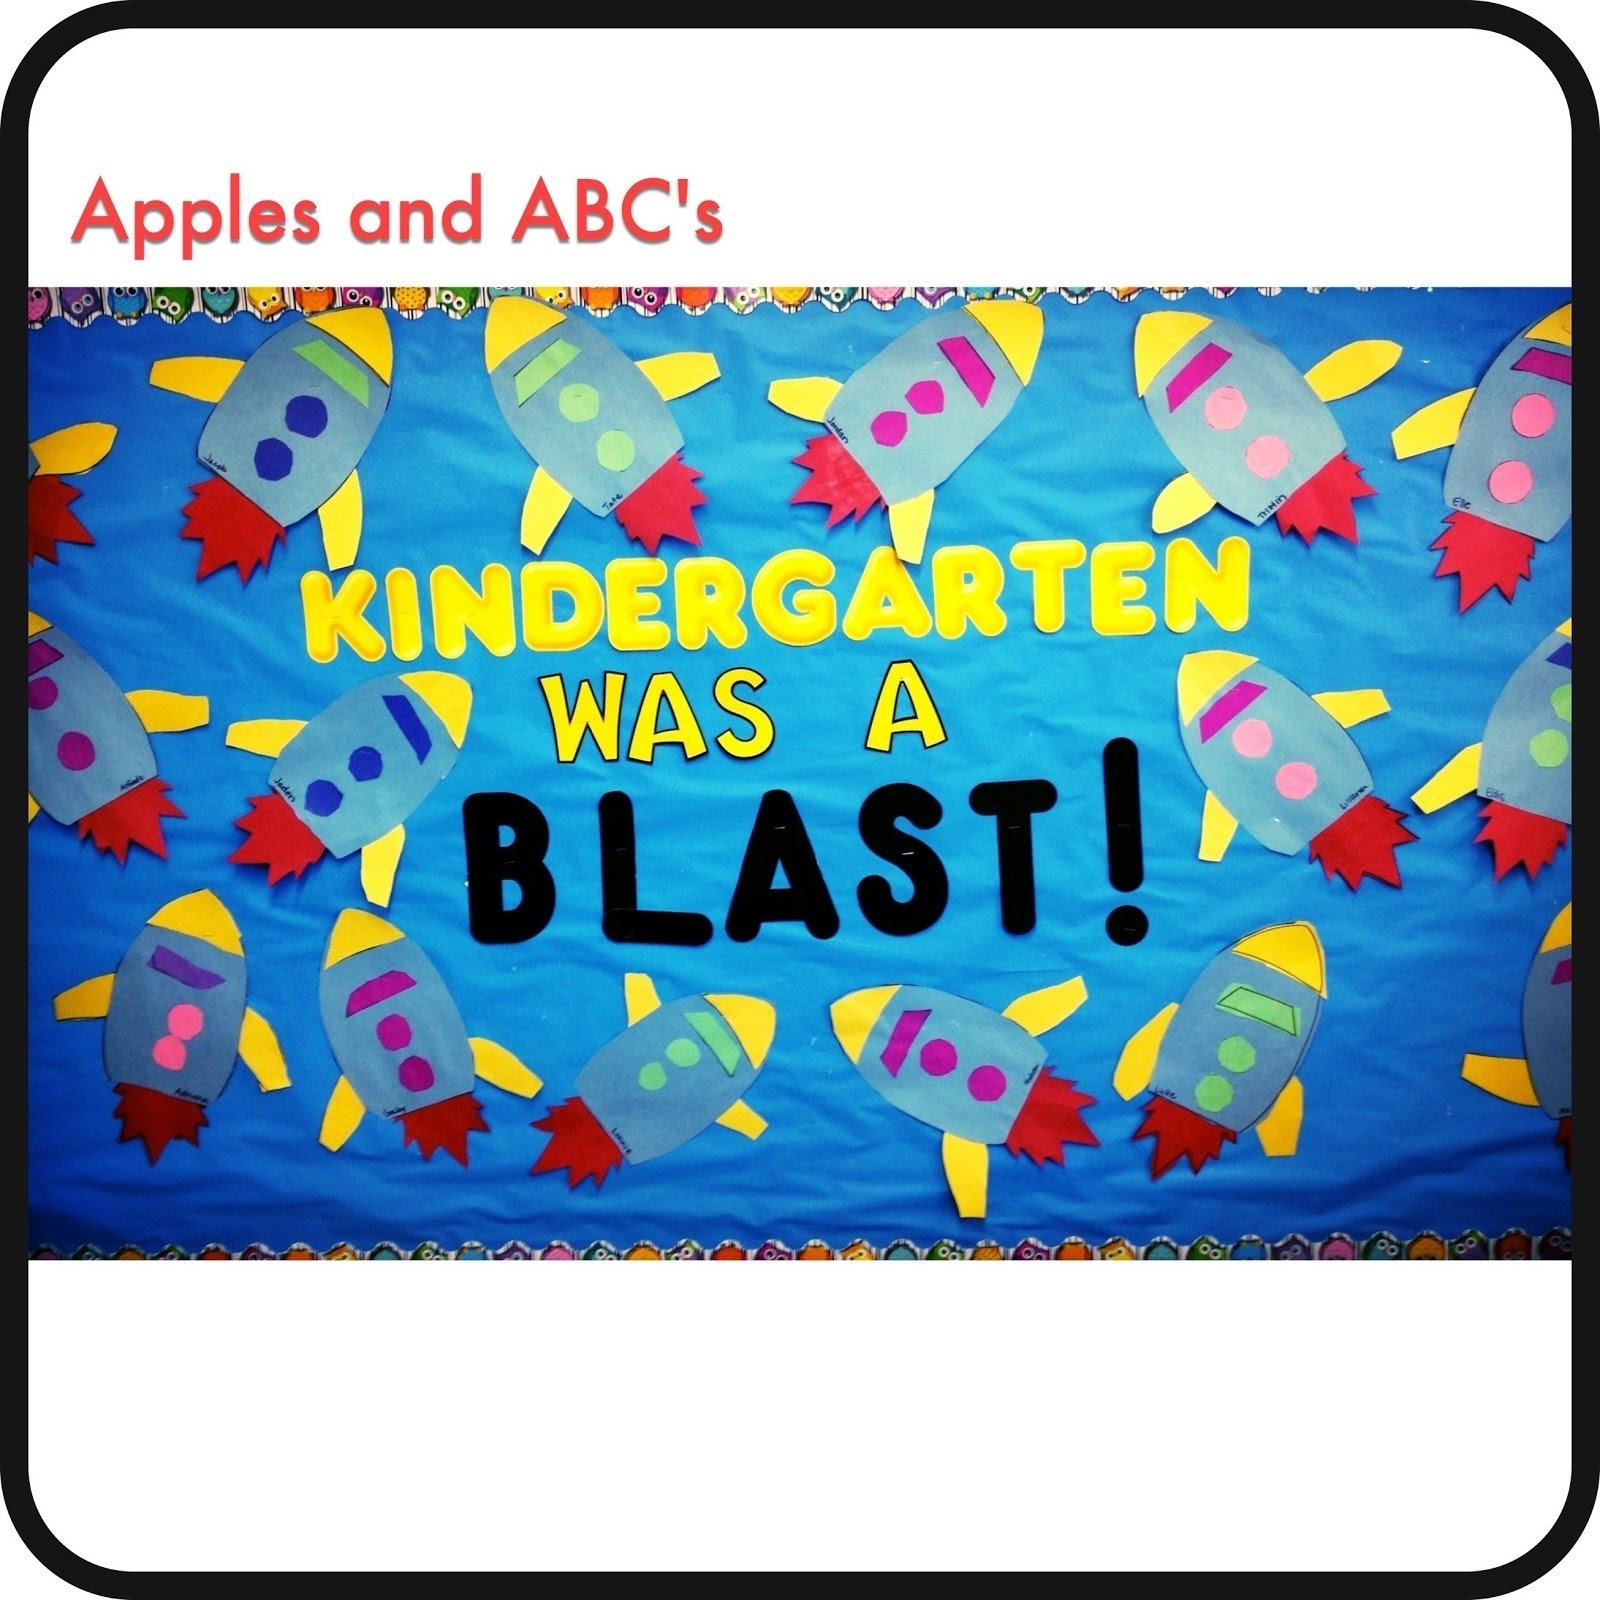 10 Perfect End Of The Year Bulletin Board Ideas end of the year bulletin board ideas apples and abcs 2022